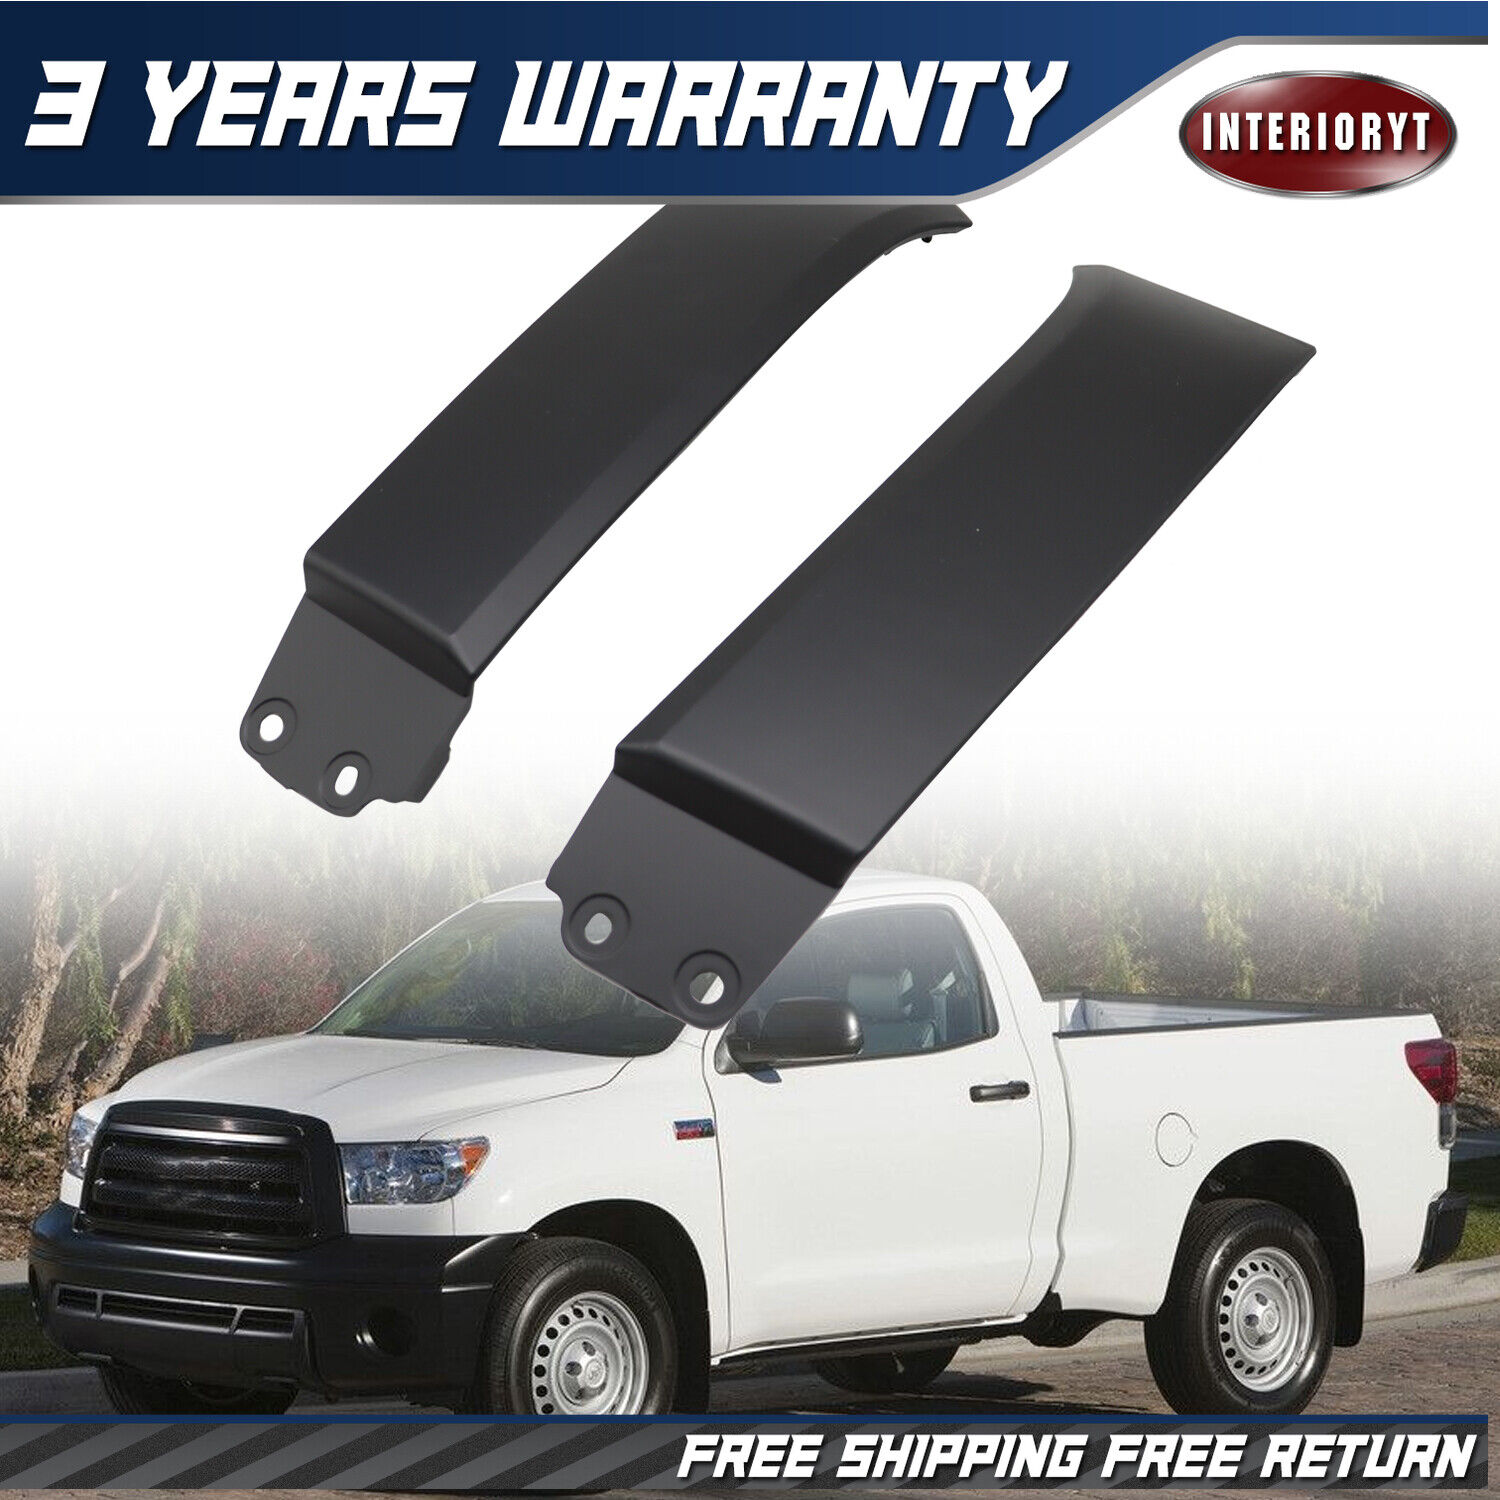 For Toyota TUNDRA SEQUOIA 2007-2013 Front Bumper Headlight Filler Trim Cover